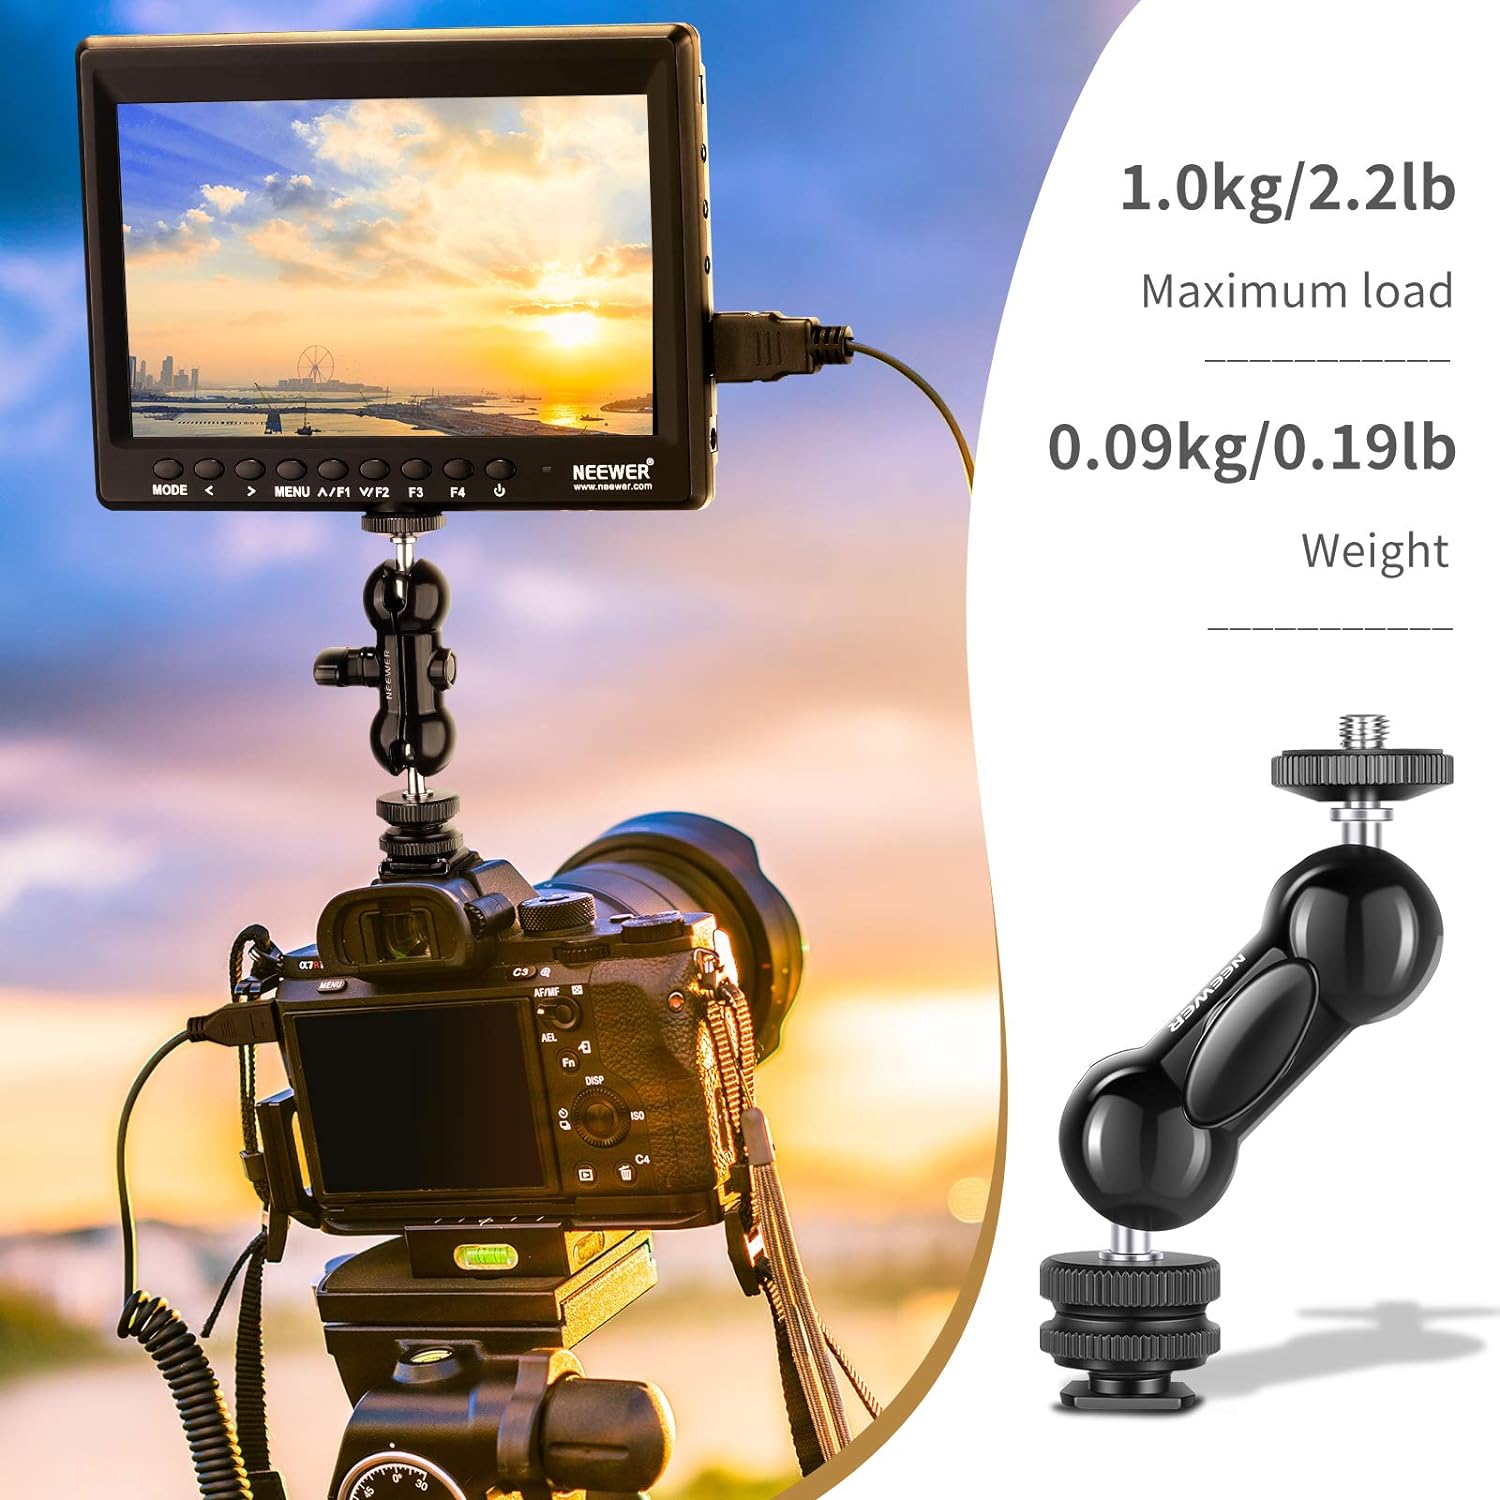 Neewer Cool Ballhead Multi-Function Double Ball Head with Cold Shoe Mount and 1/4" Screw for DSLR Cameras, Camcorders, Camera Cage, Monitor, LED Light, Load up to 2.2lb/1kg â€” ST13